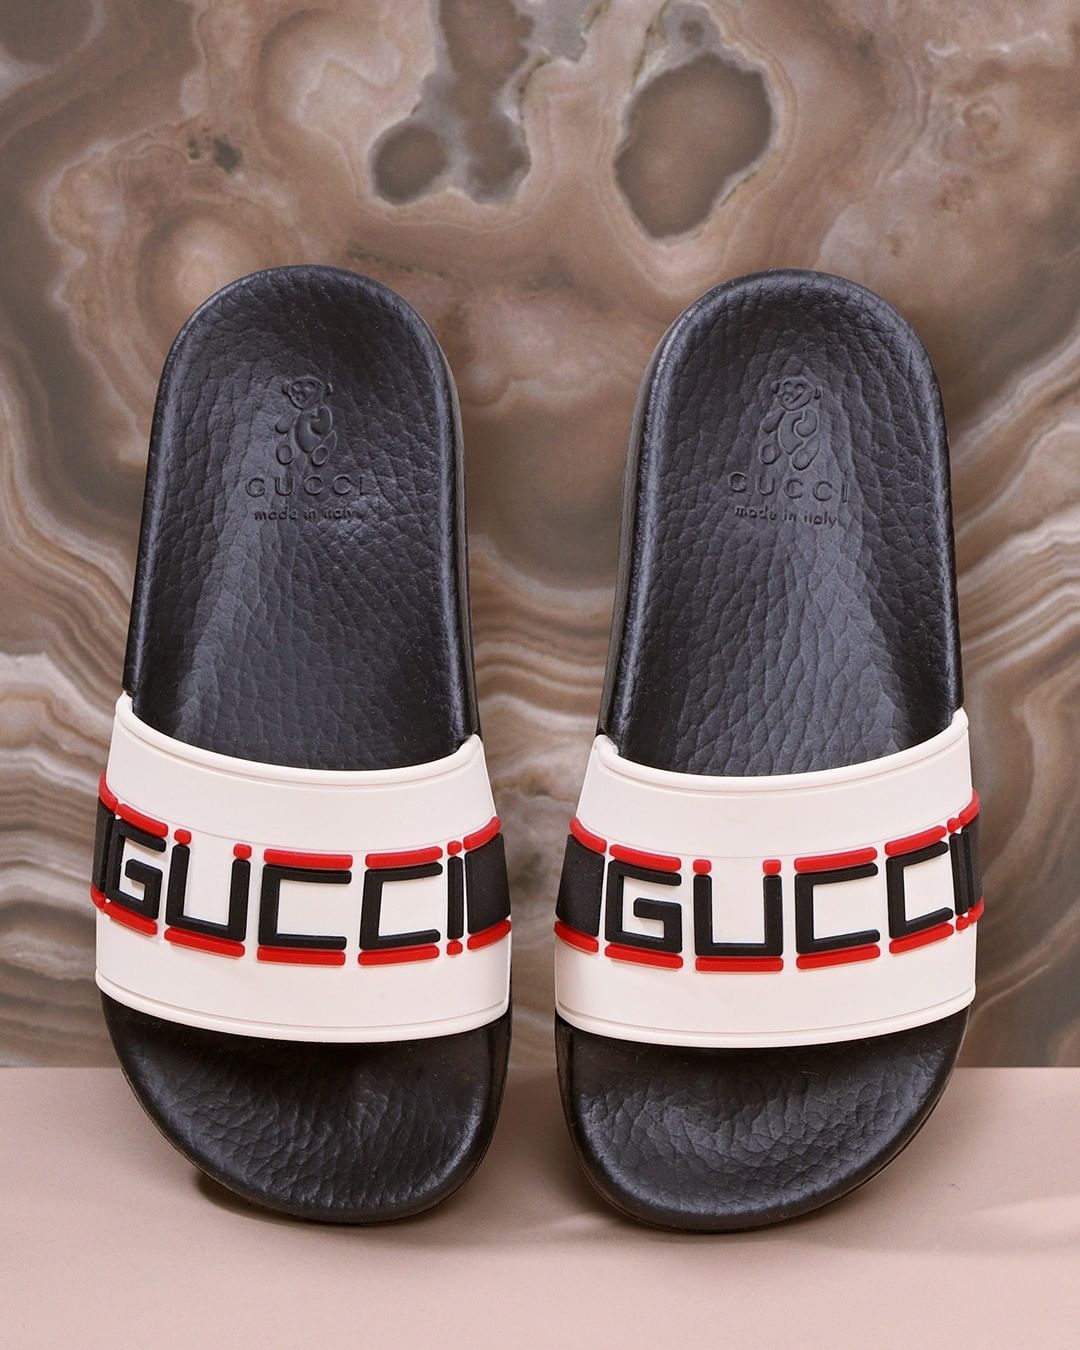 BAMBINIFASHION.COM - Step up your game with #g#gucci
----------
--------
------
----
--
-
#guccislides #guccishoes #bambinifashion #kidswear #kidsfashion #kidstyle